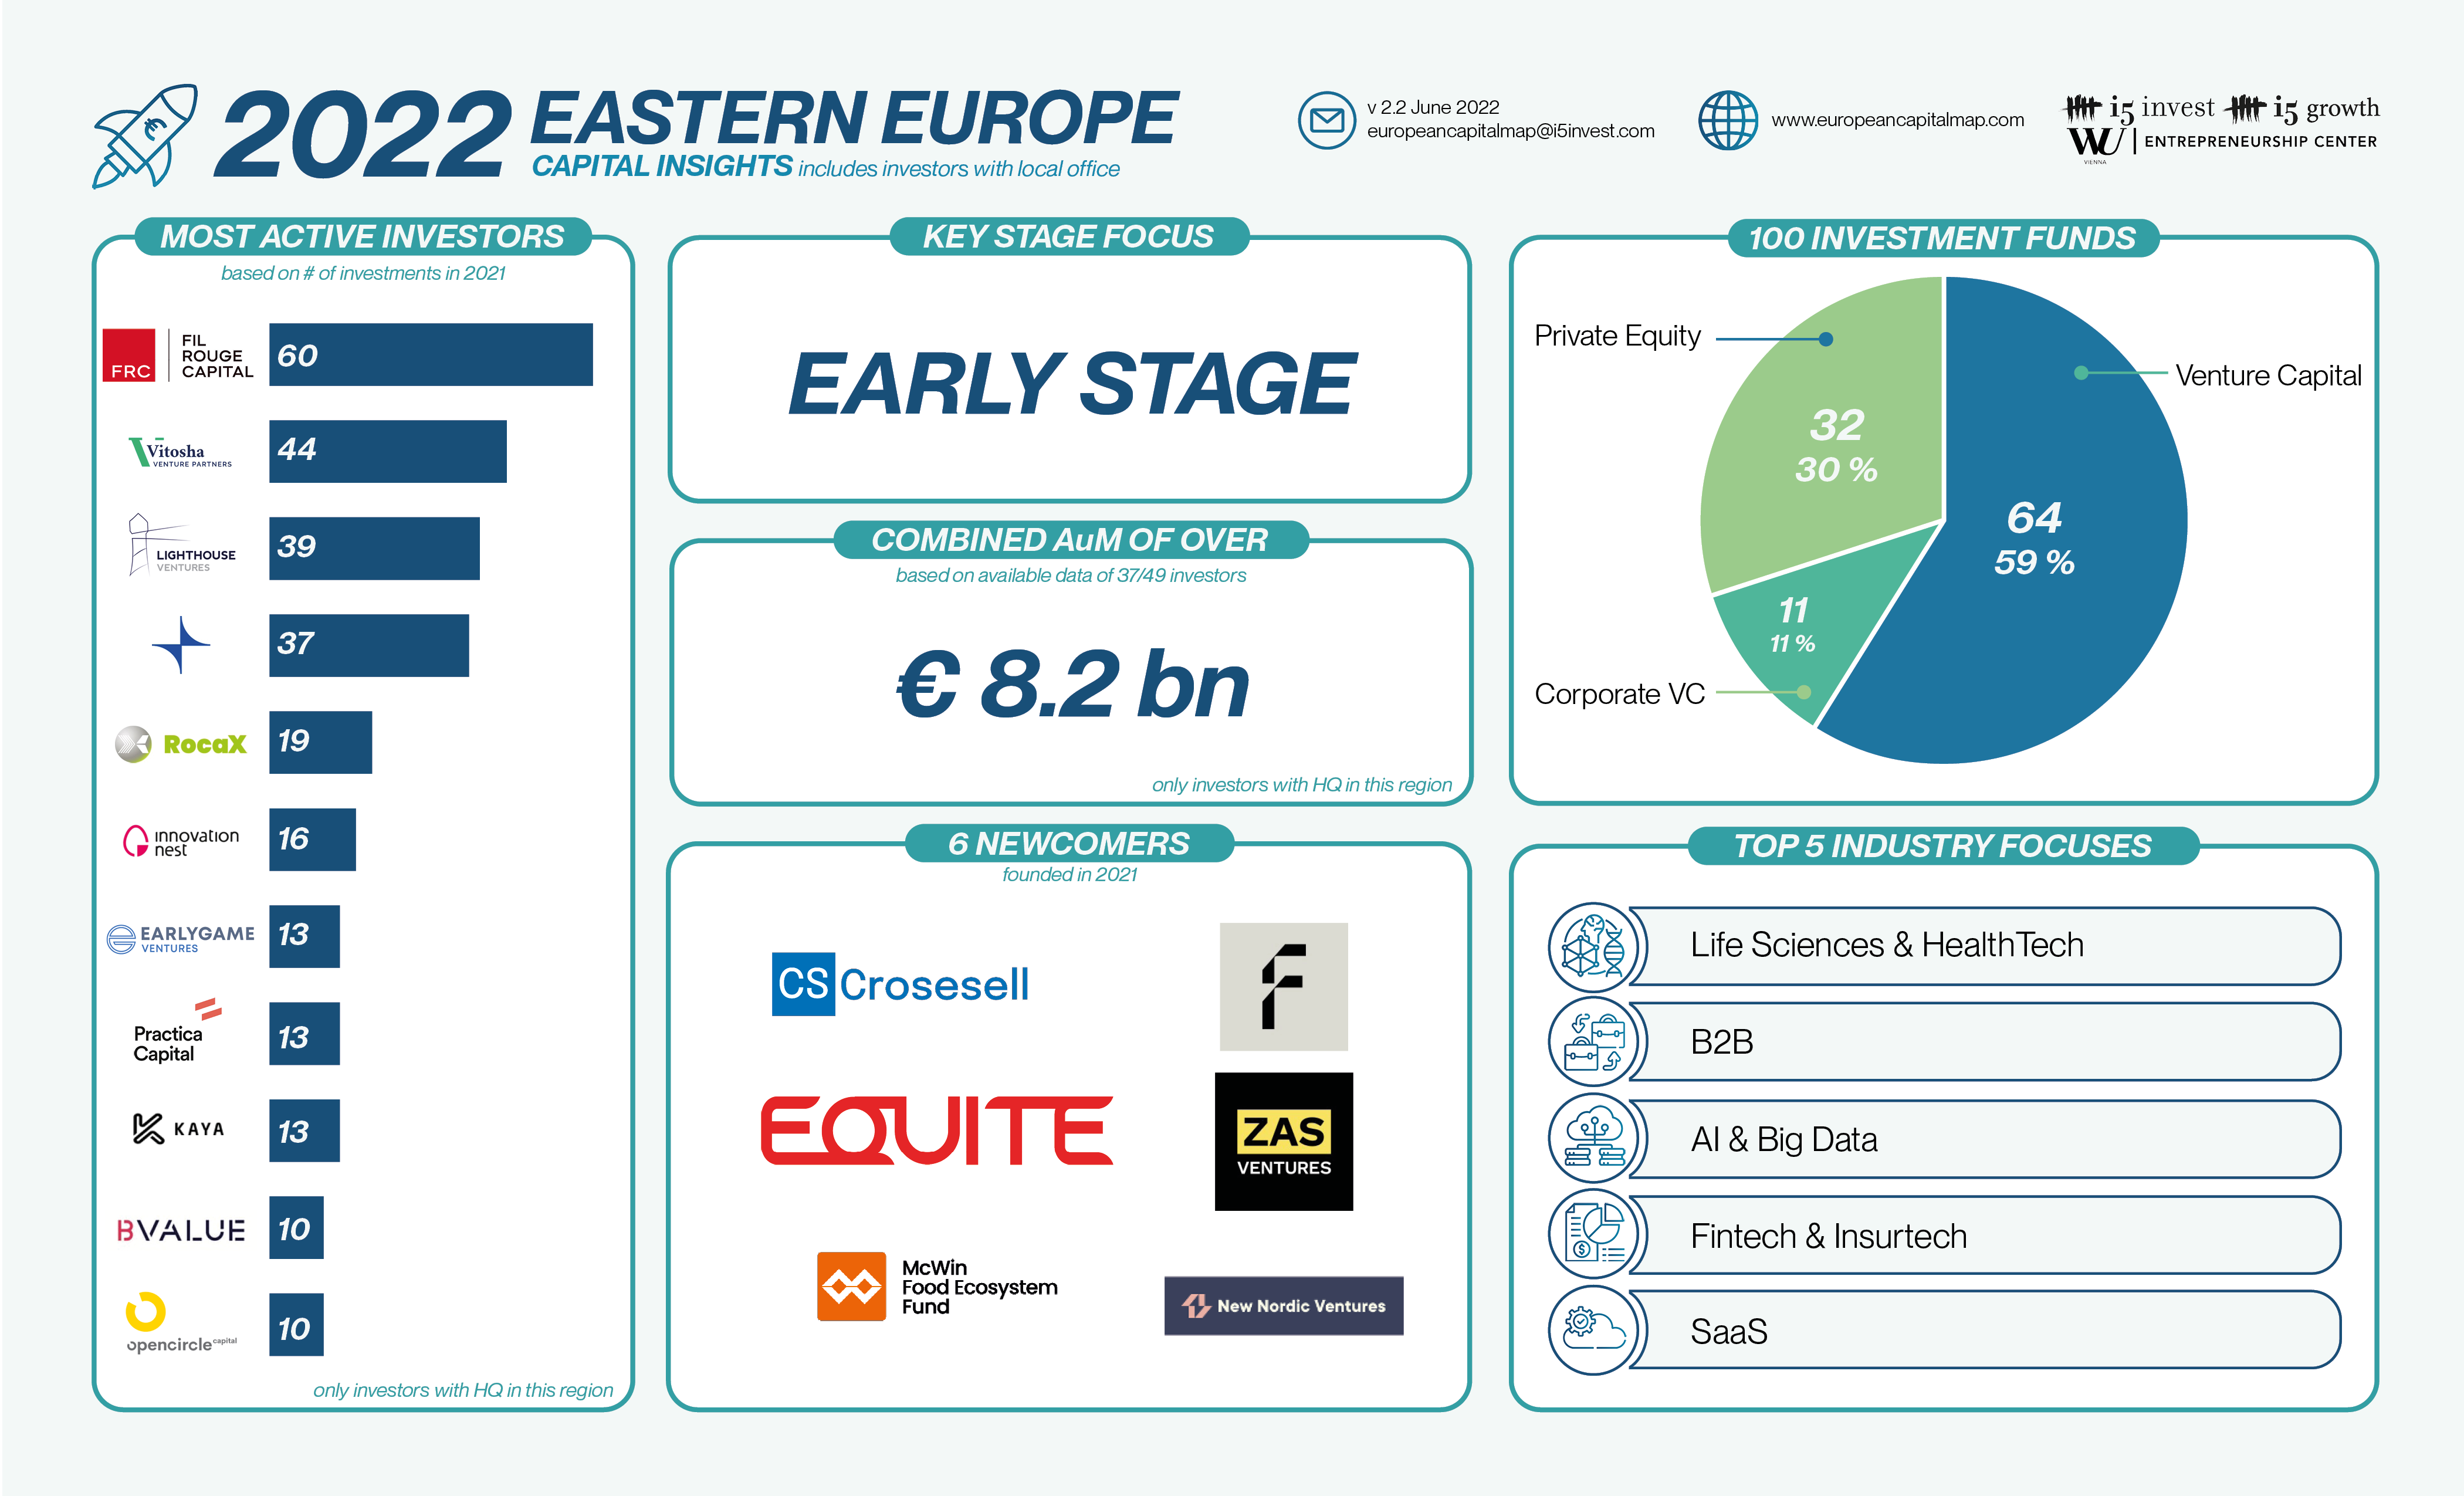 Europe Gaming private equity and venture capital (PE & VC) Funds market map